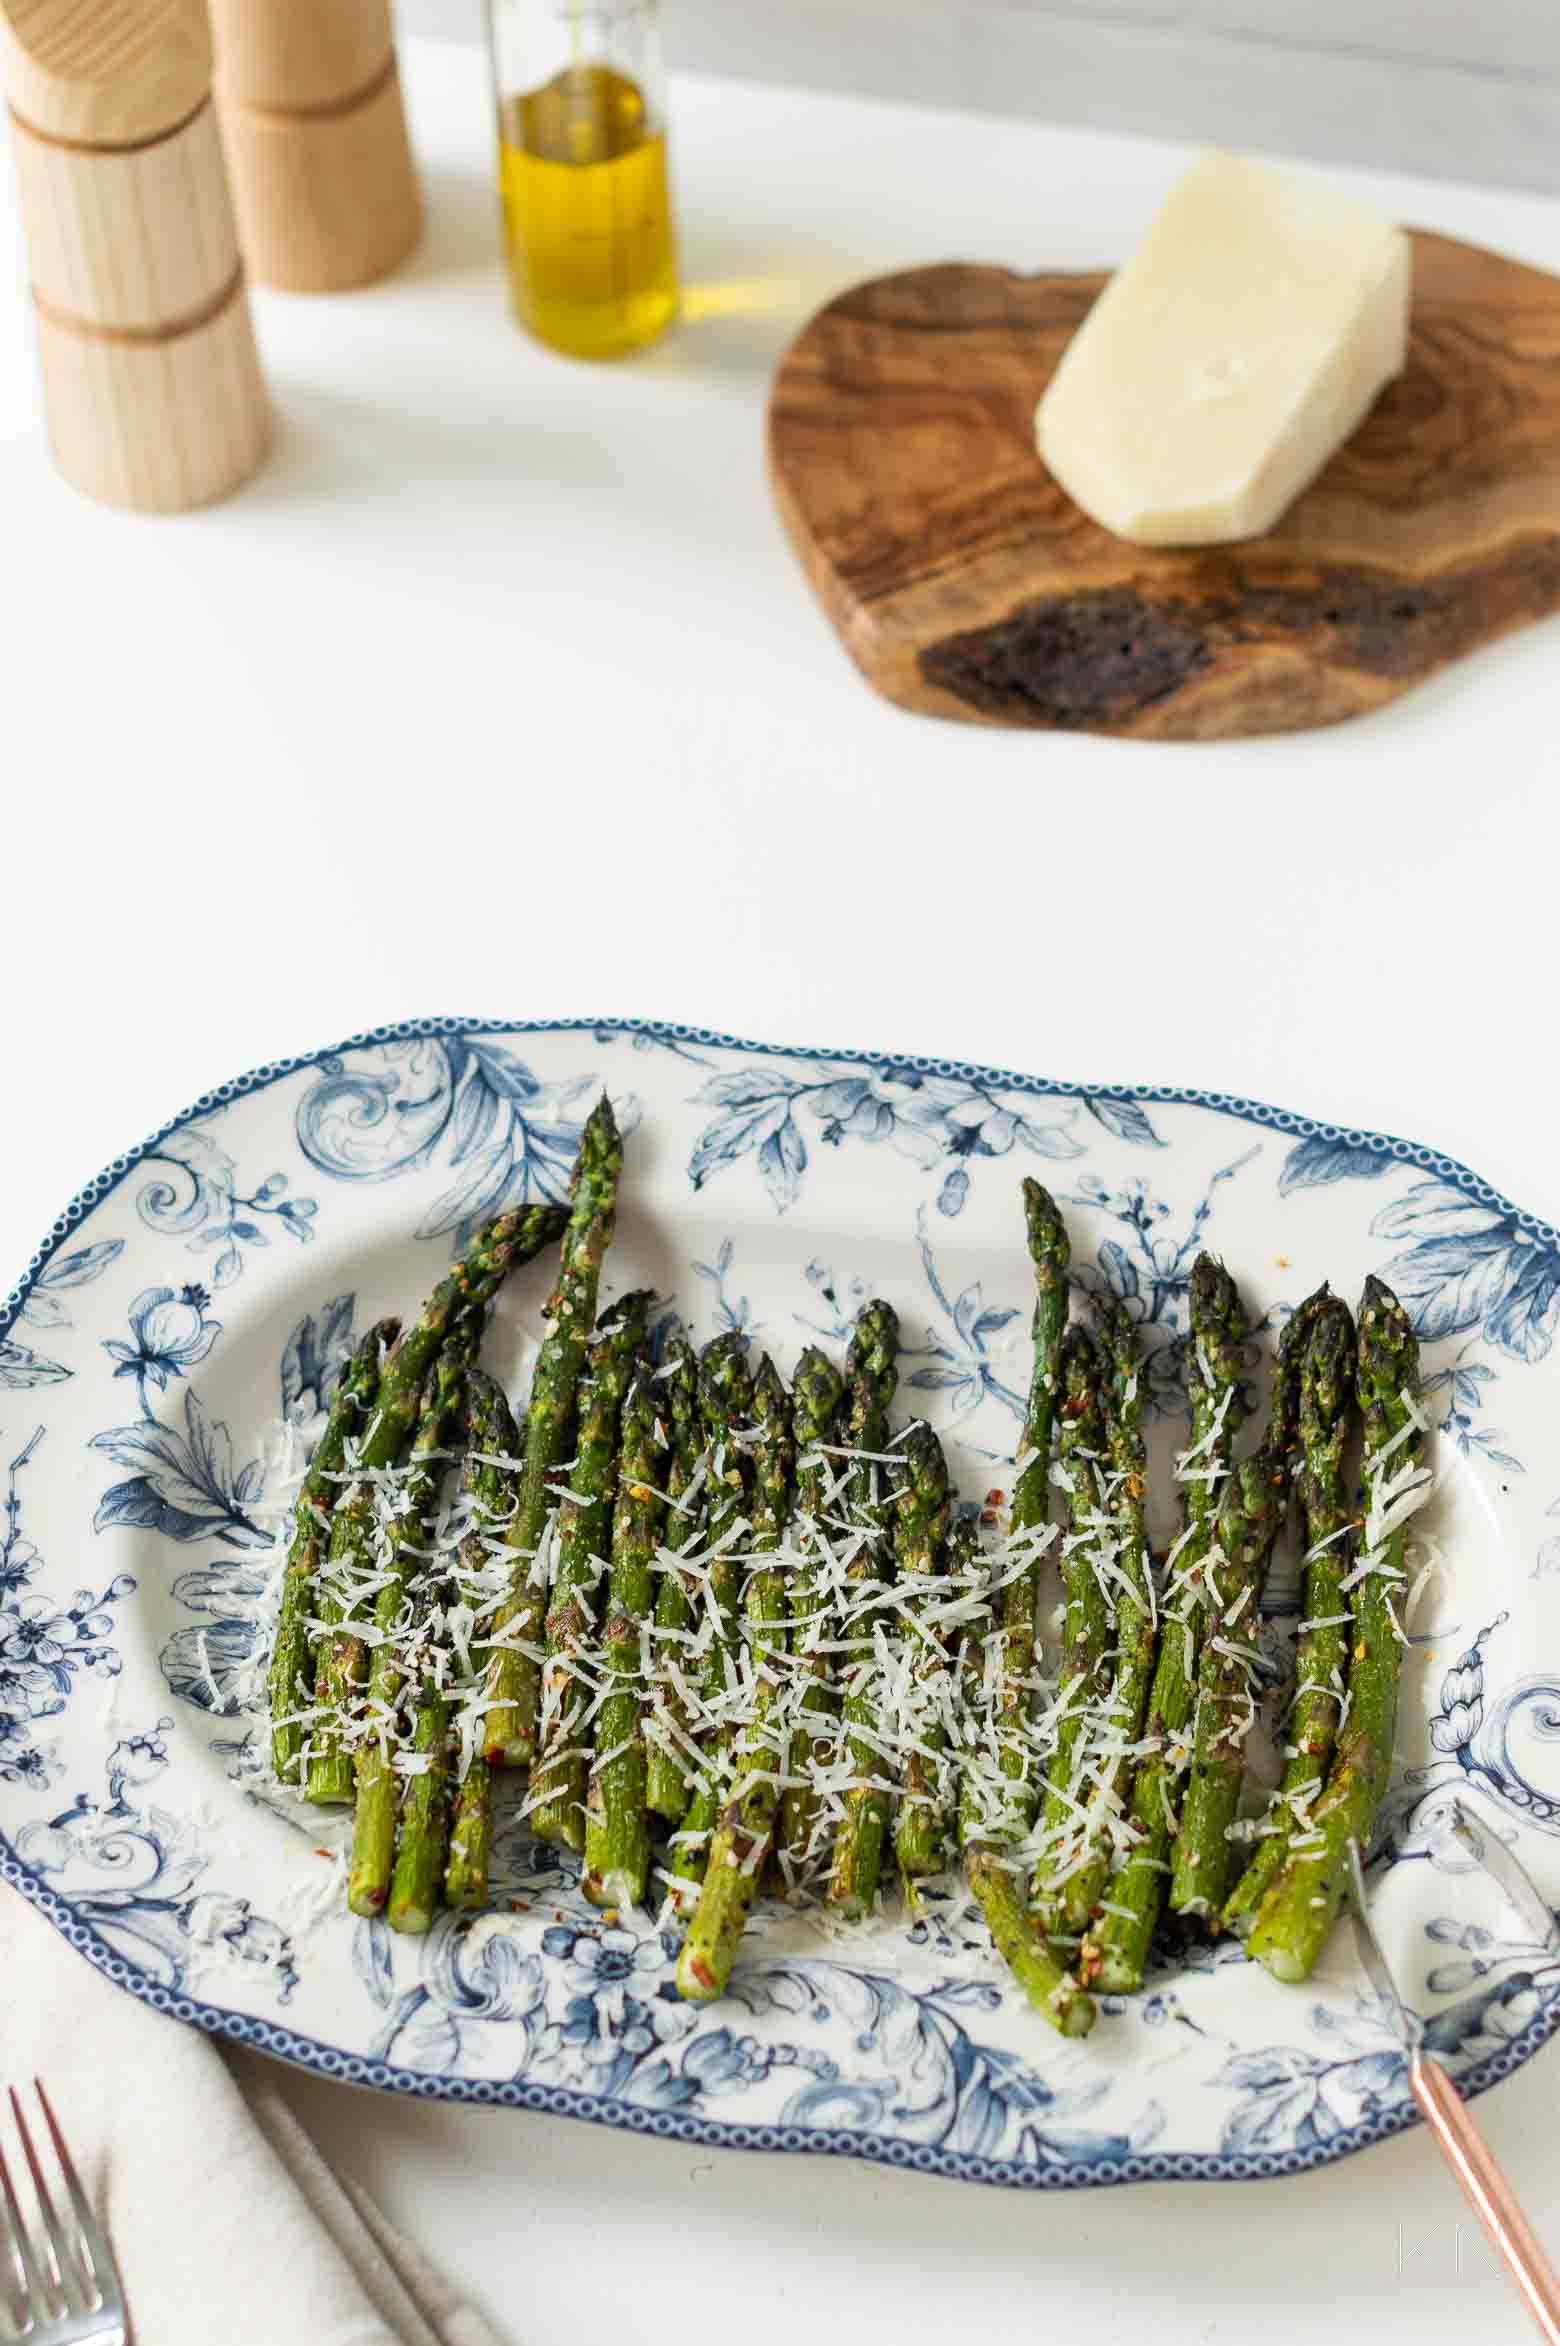 Yummy Vegetable Side - Oven Roasted Asparagus with Parmesan Cheese